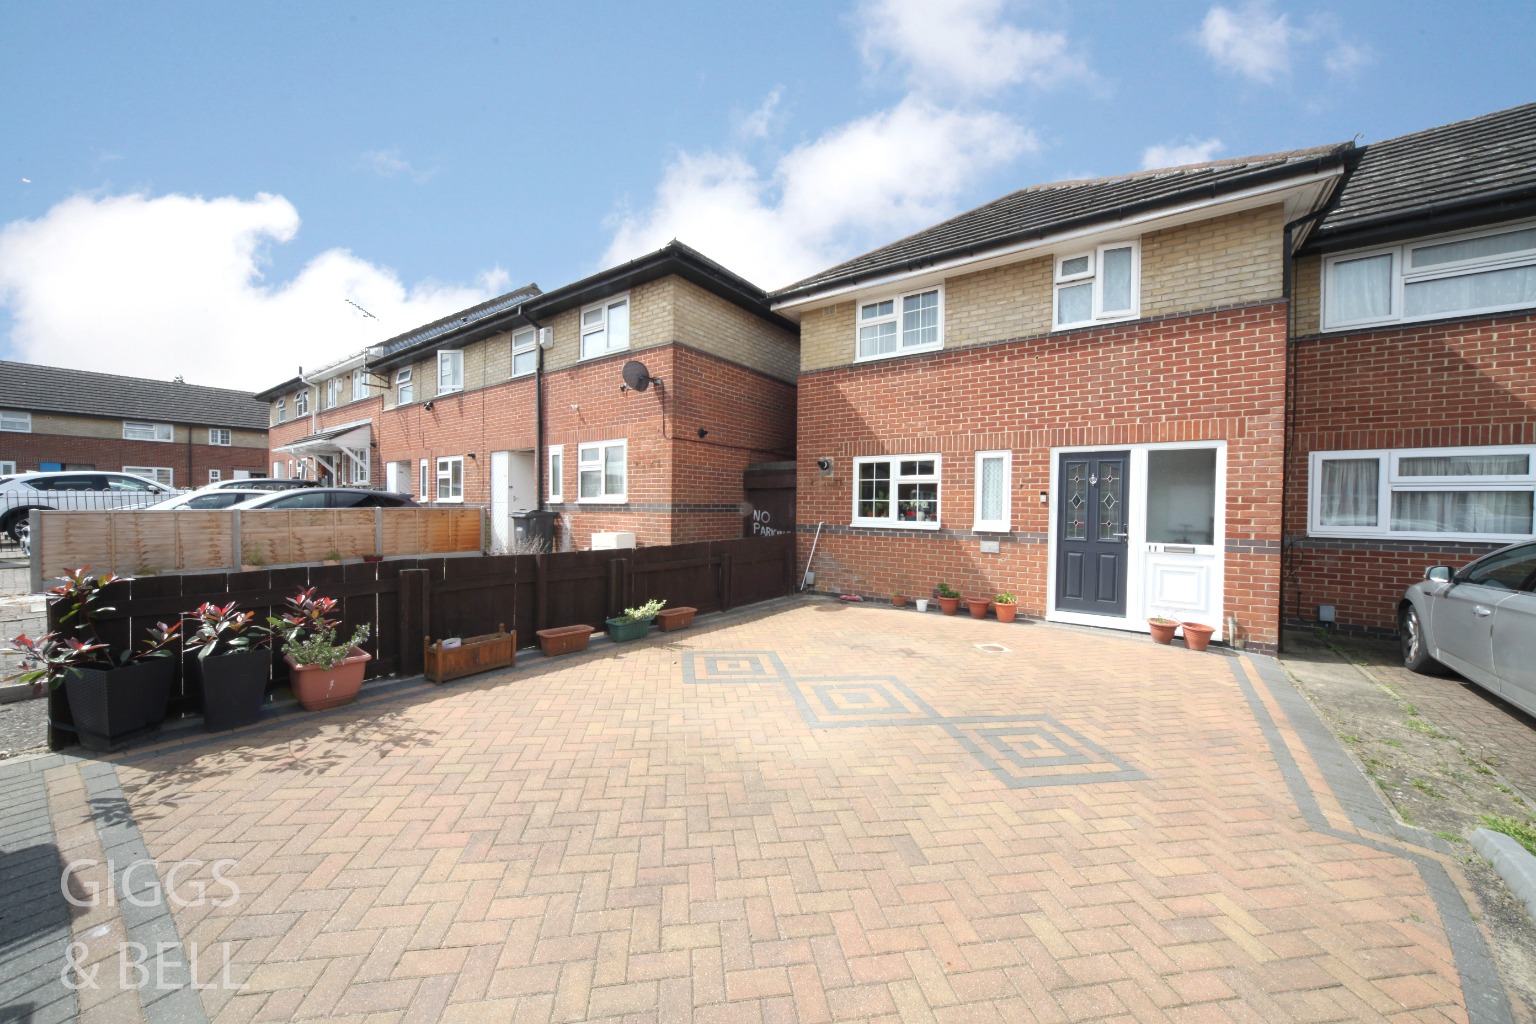 3 bed end of terrace house for sale in Holkham Close, Luton, LU4 